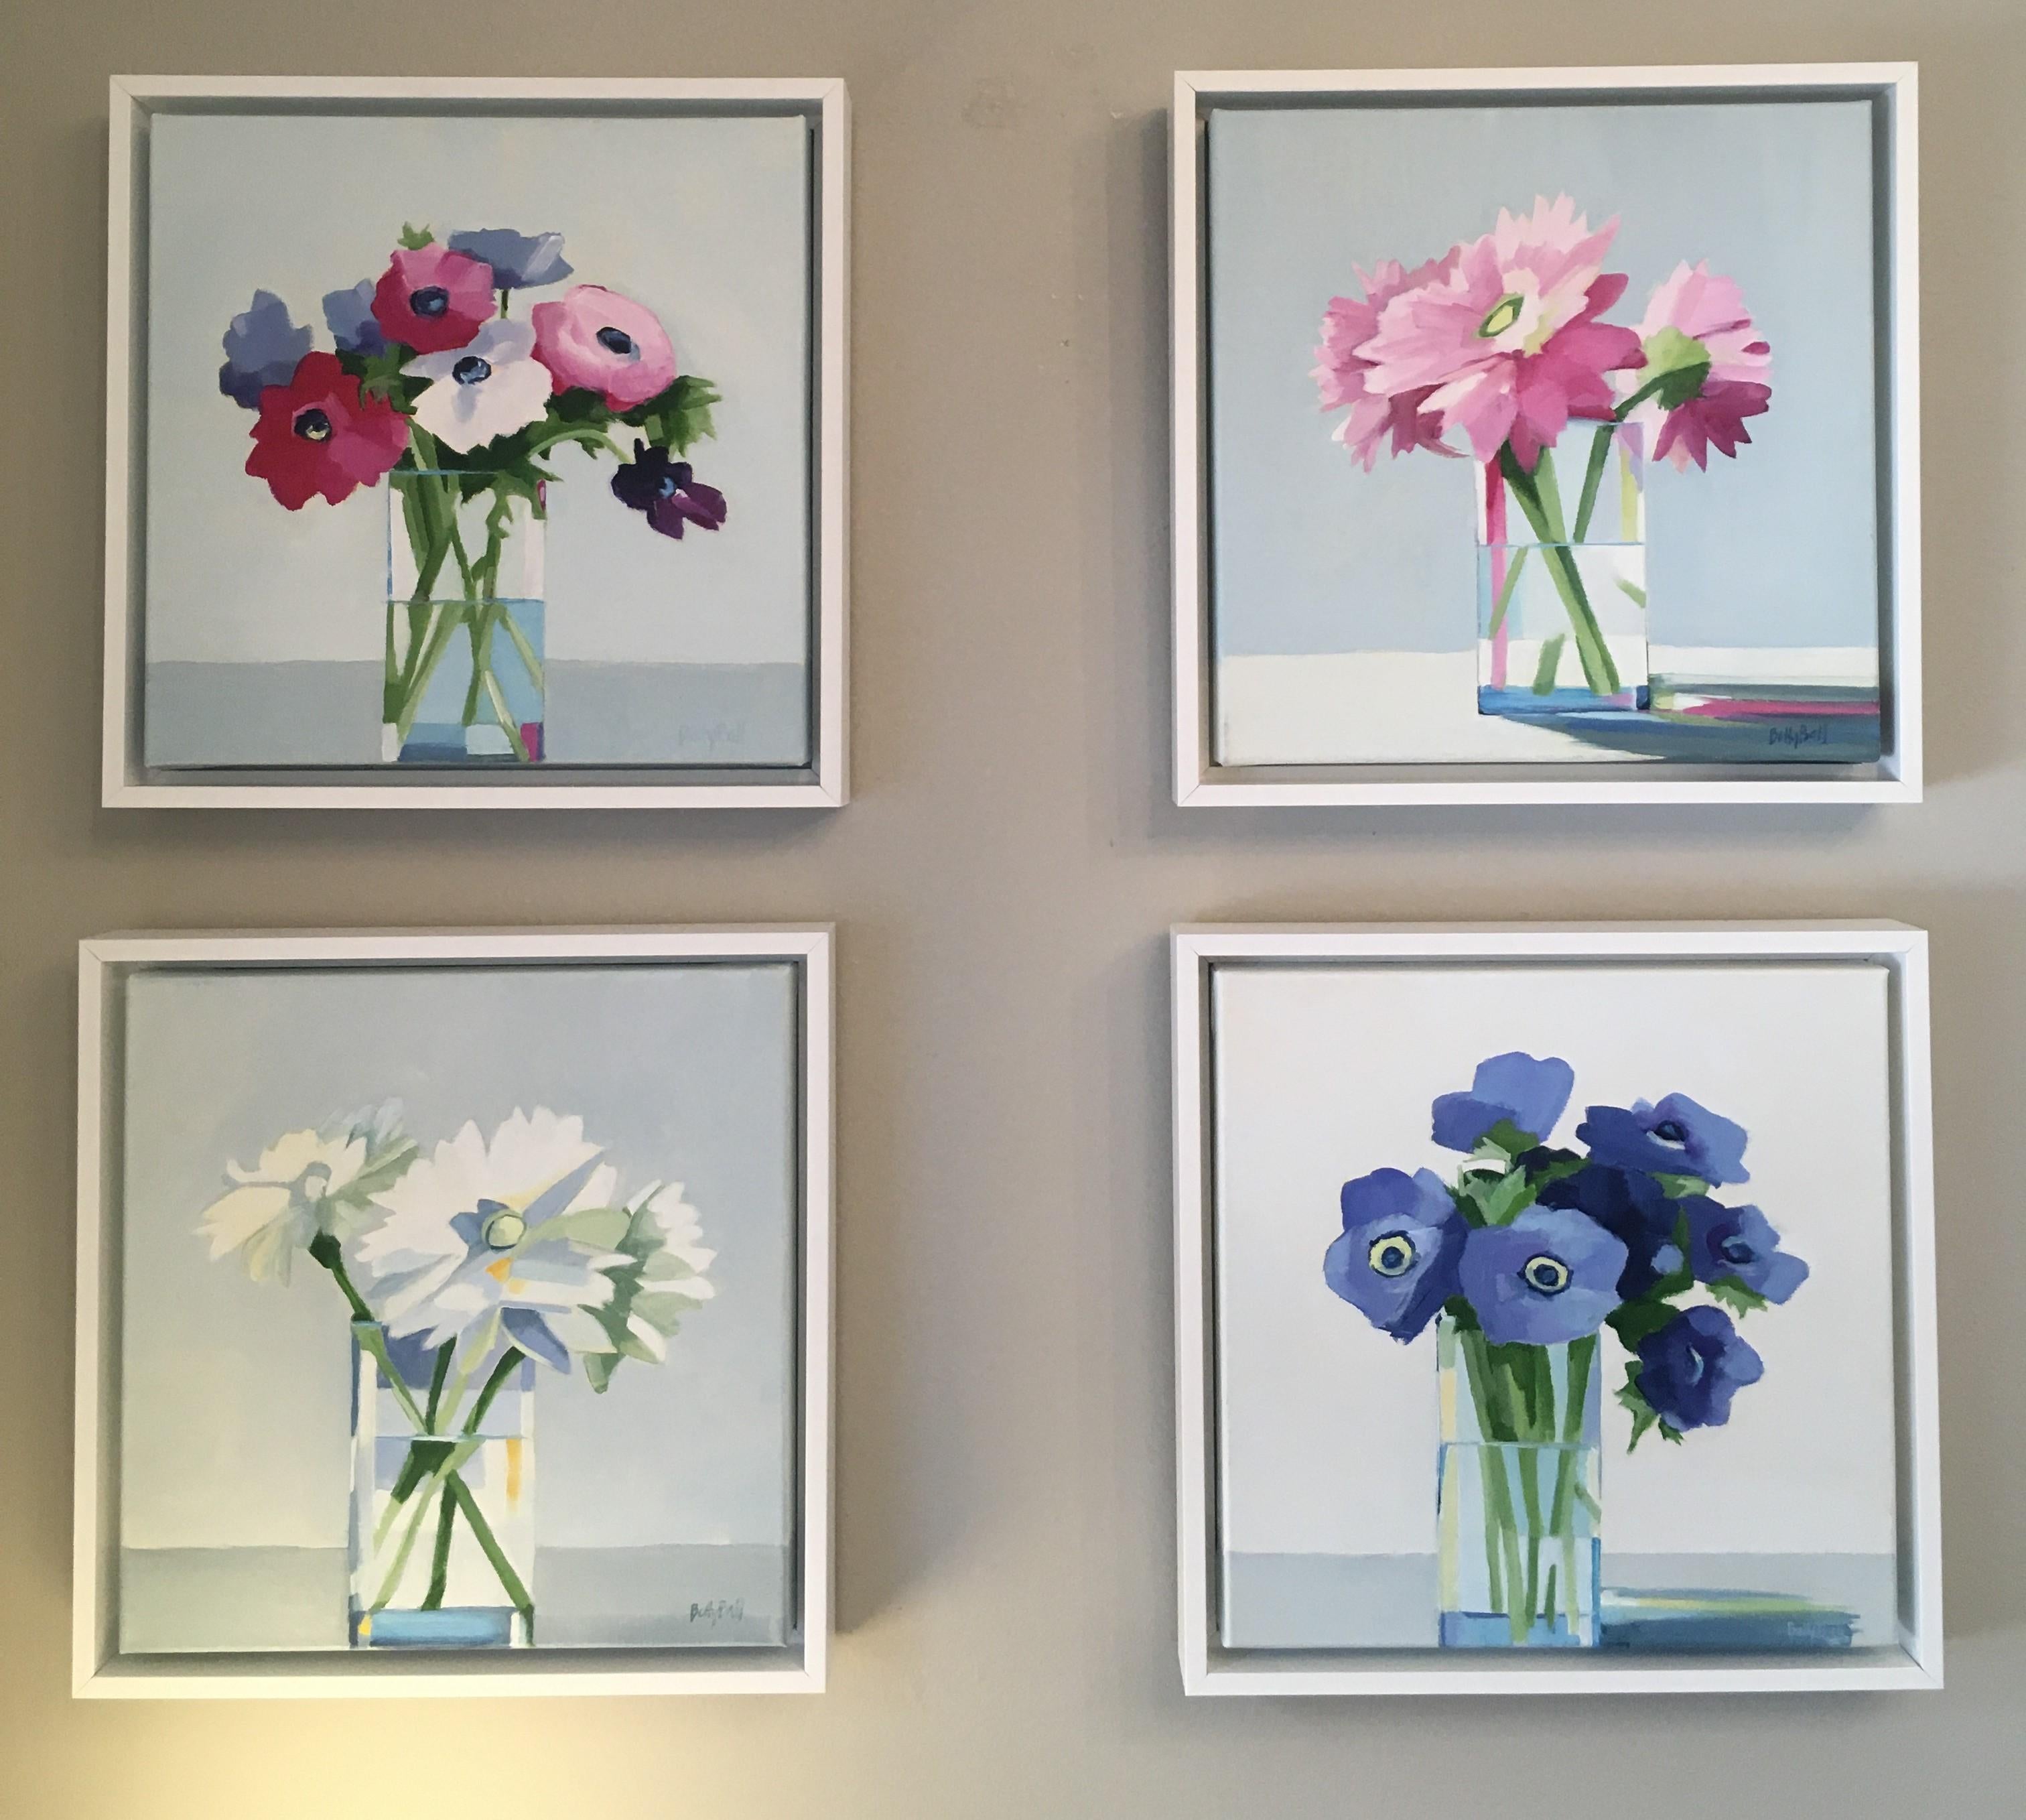 Anemone Spring by Betty Ball is part of her Flower series.  It is Oil on Linen, 12x12.  It is framed to 13.5 x 13.5  It is $875.  It is a beautiful group of colorful flowers in a vase with water.  A perfect Mother's day gift of forever